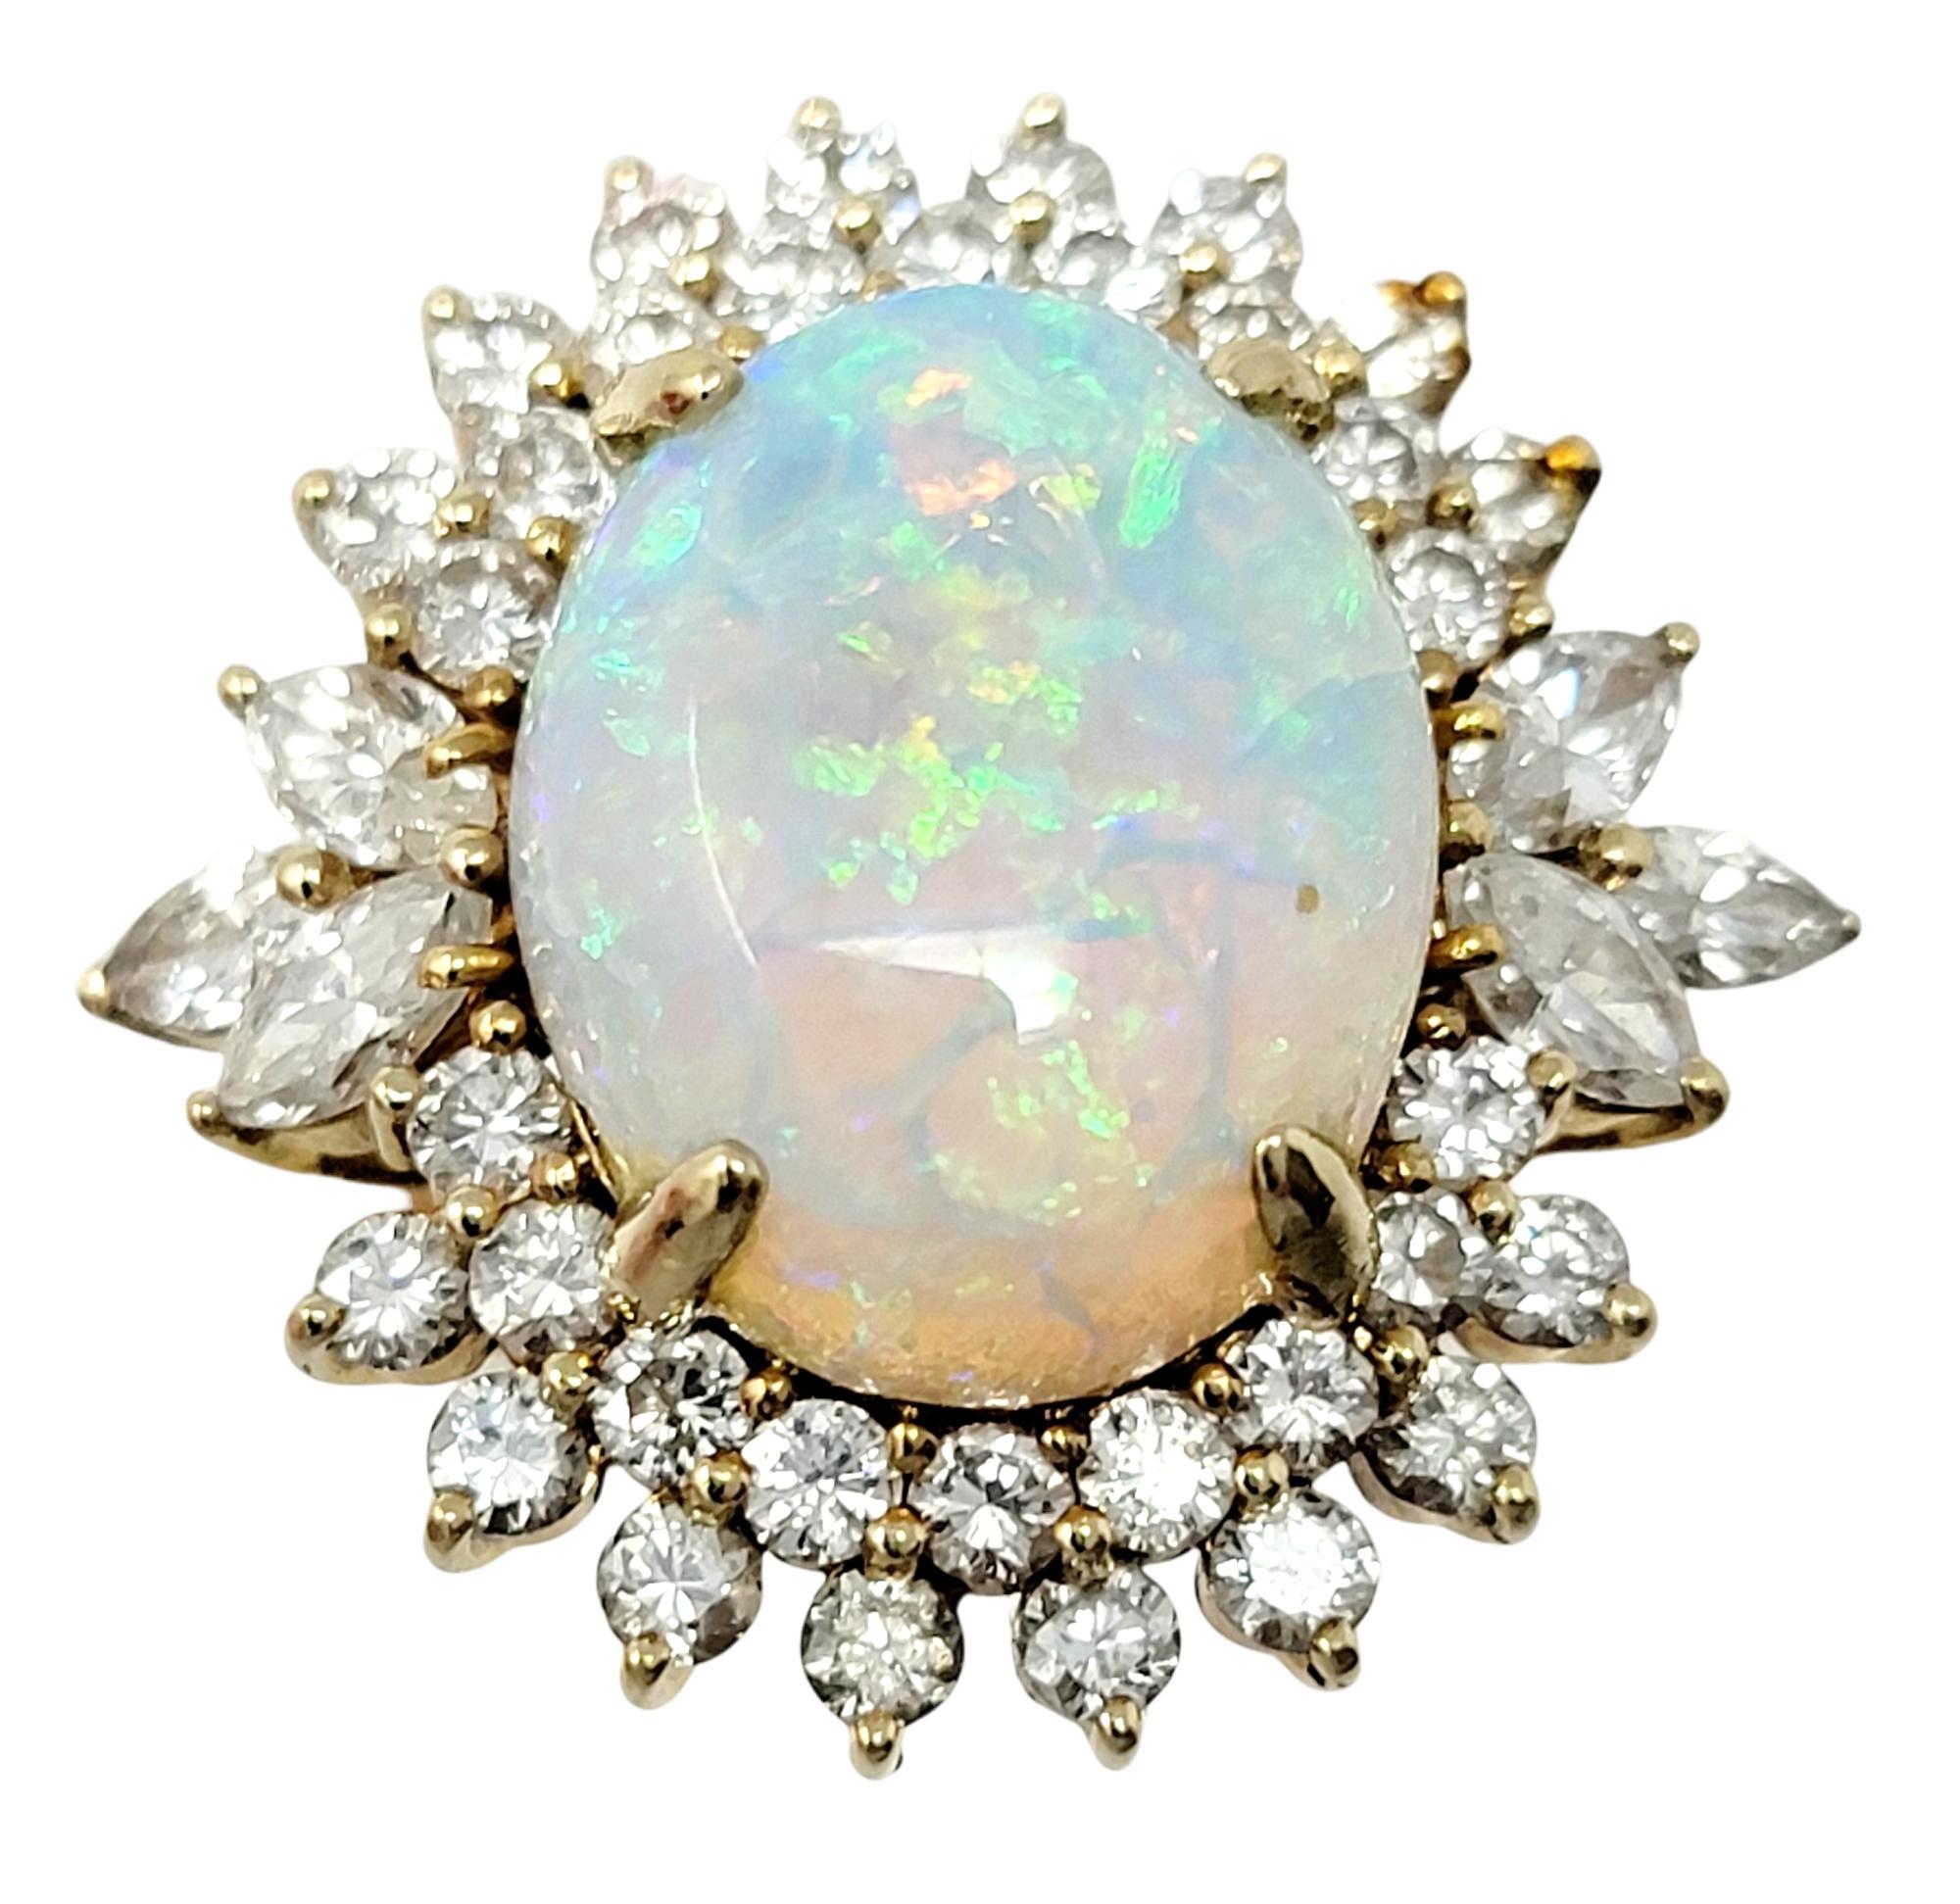 Contemporary 7.55 Carats Total Opal Cabochon and Diamond Halo Ring in 14 Karat Yellow Gold For Sale